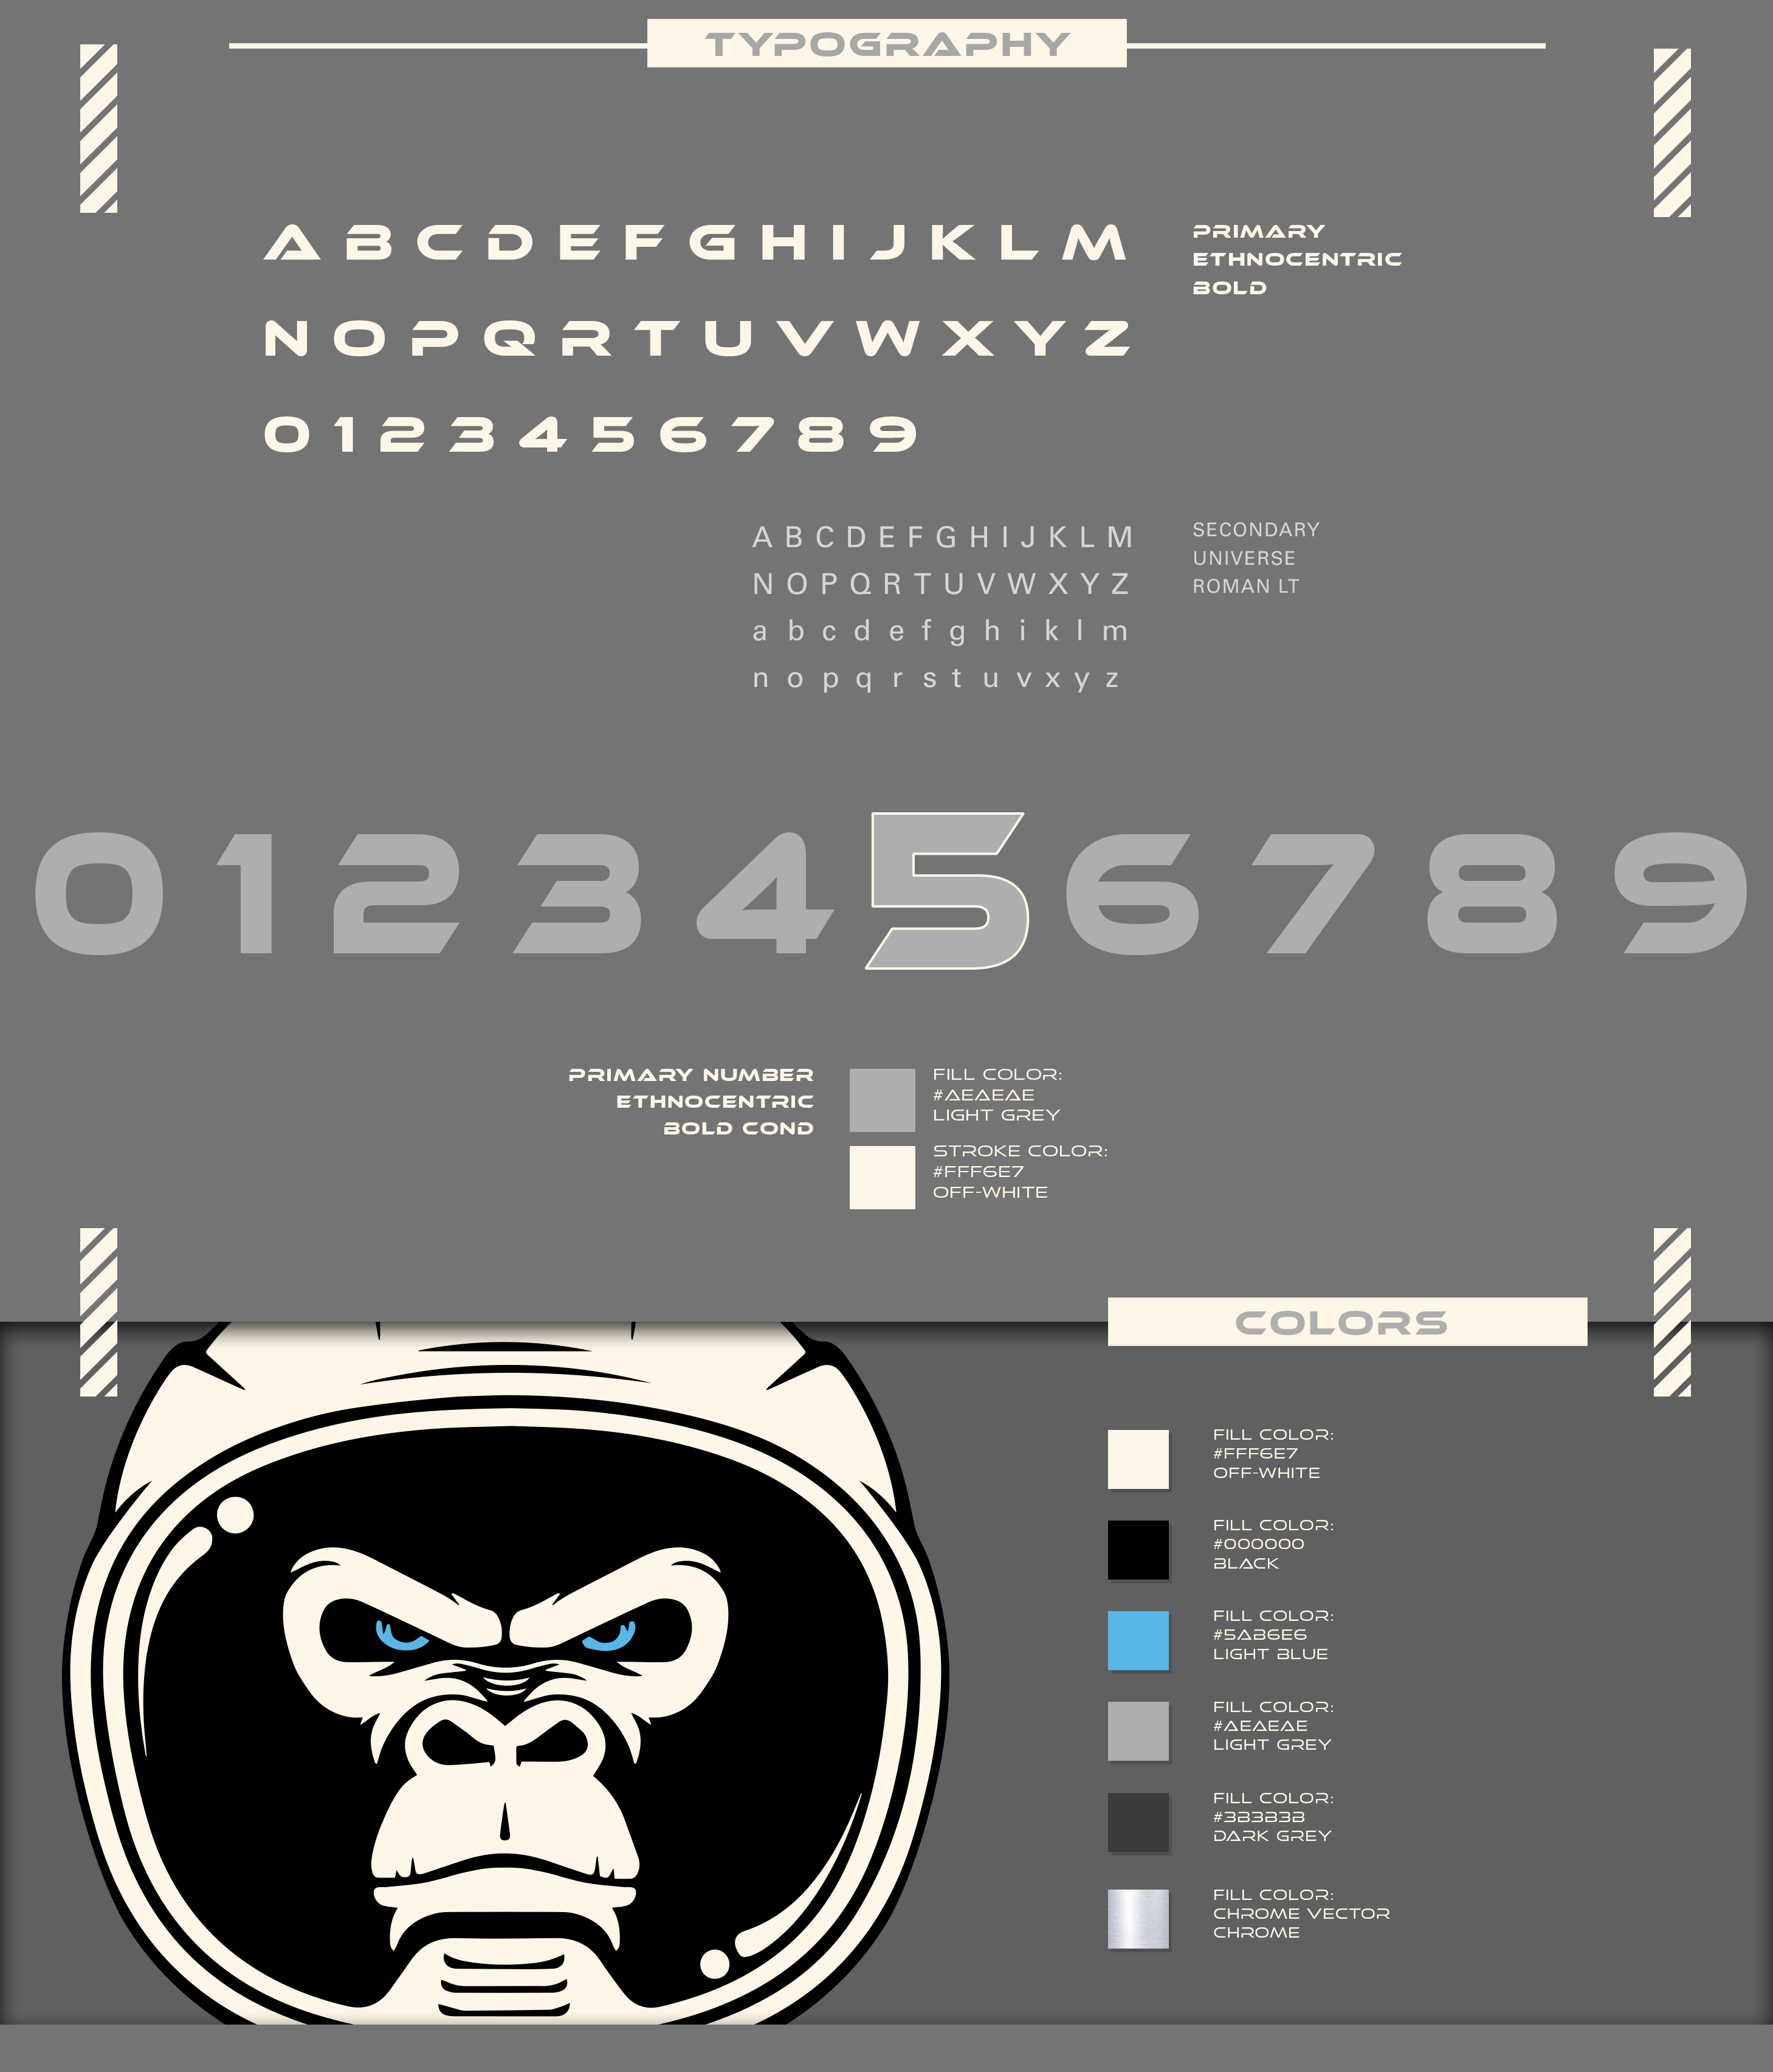 Astro_Kong-Brand-Guidelines_Type_colors